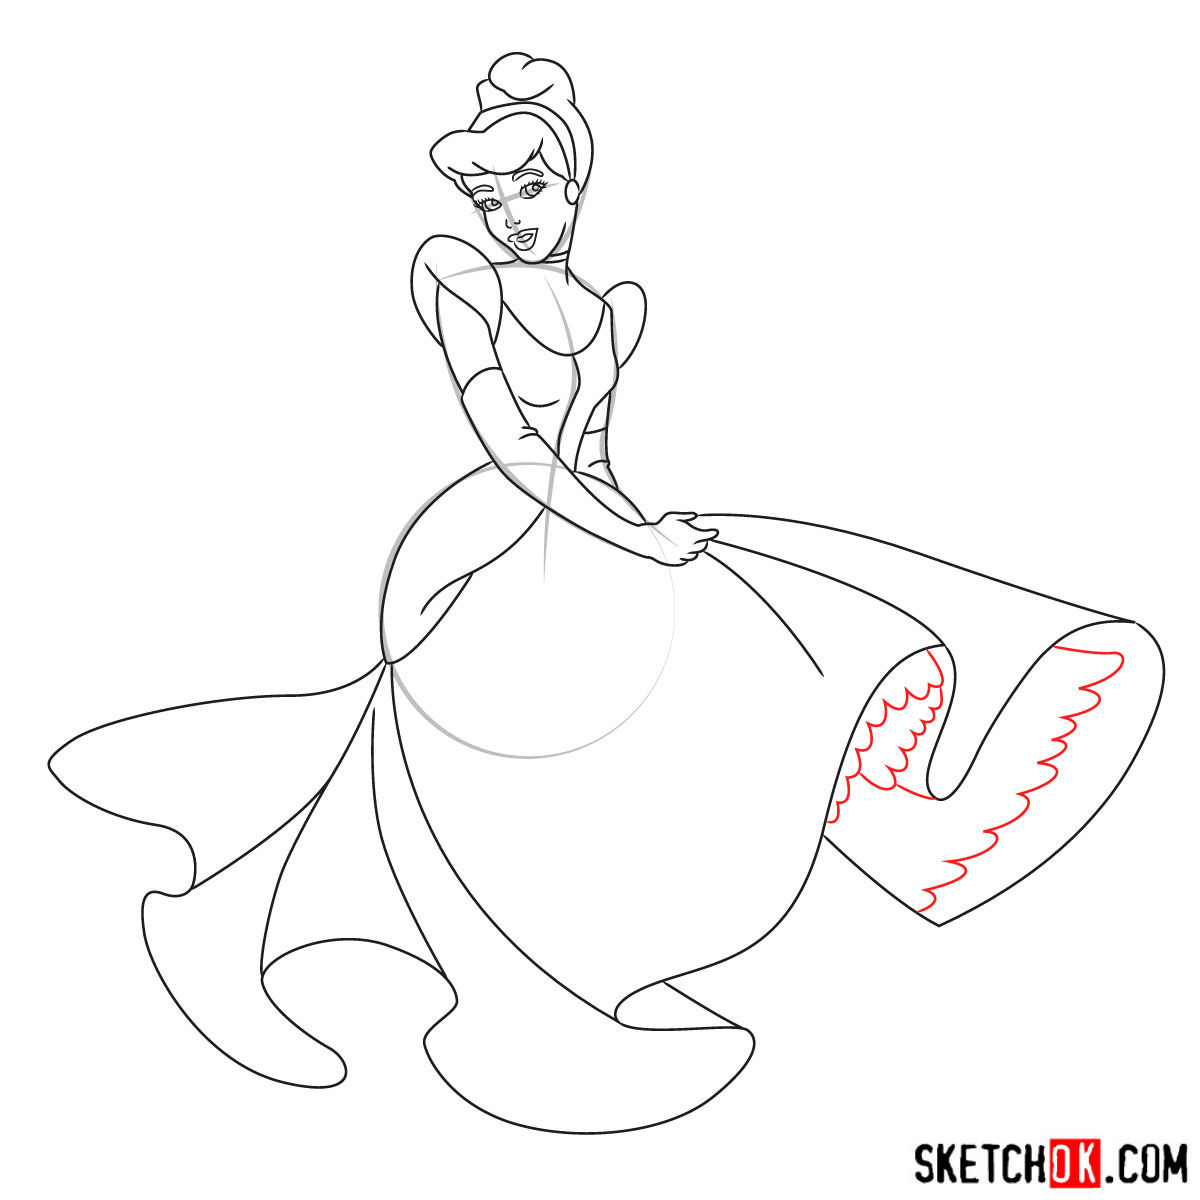 How to draw dancing Cinderella - step 12